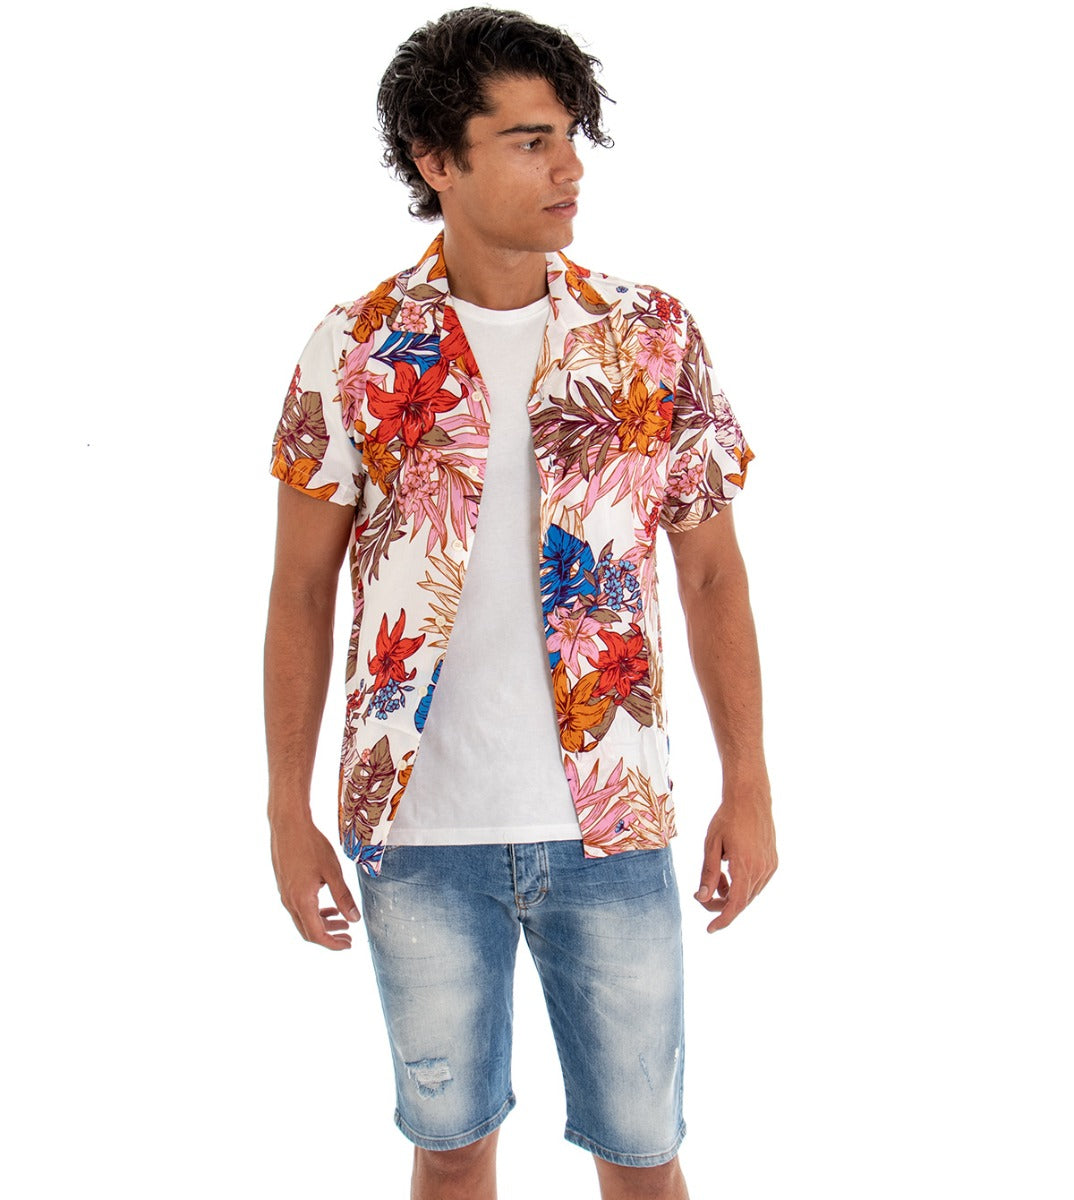 Men's Short Sleeve Shirt with Collar Multicolored Floral Pattern White GIOSAL-CC1109A